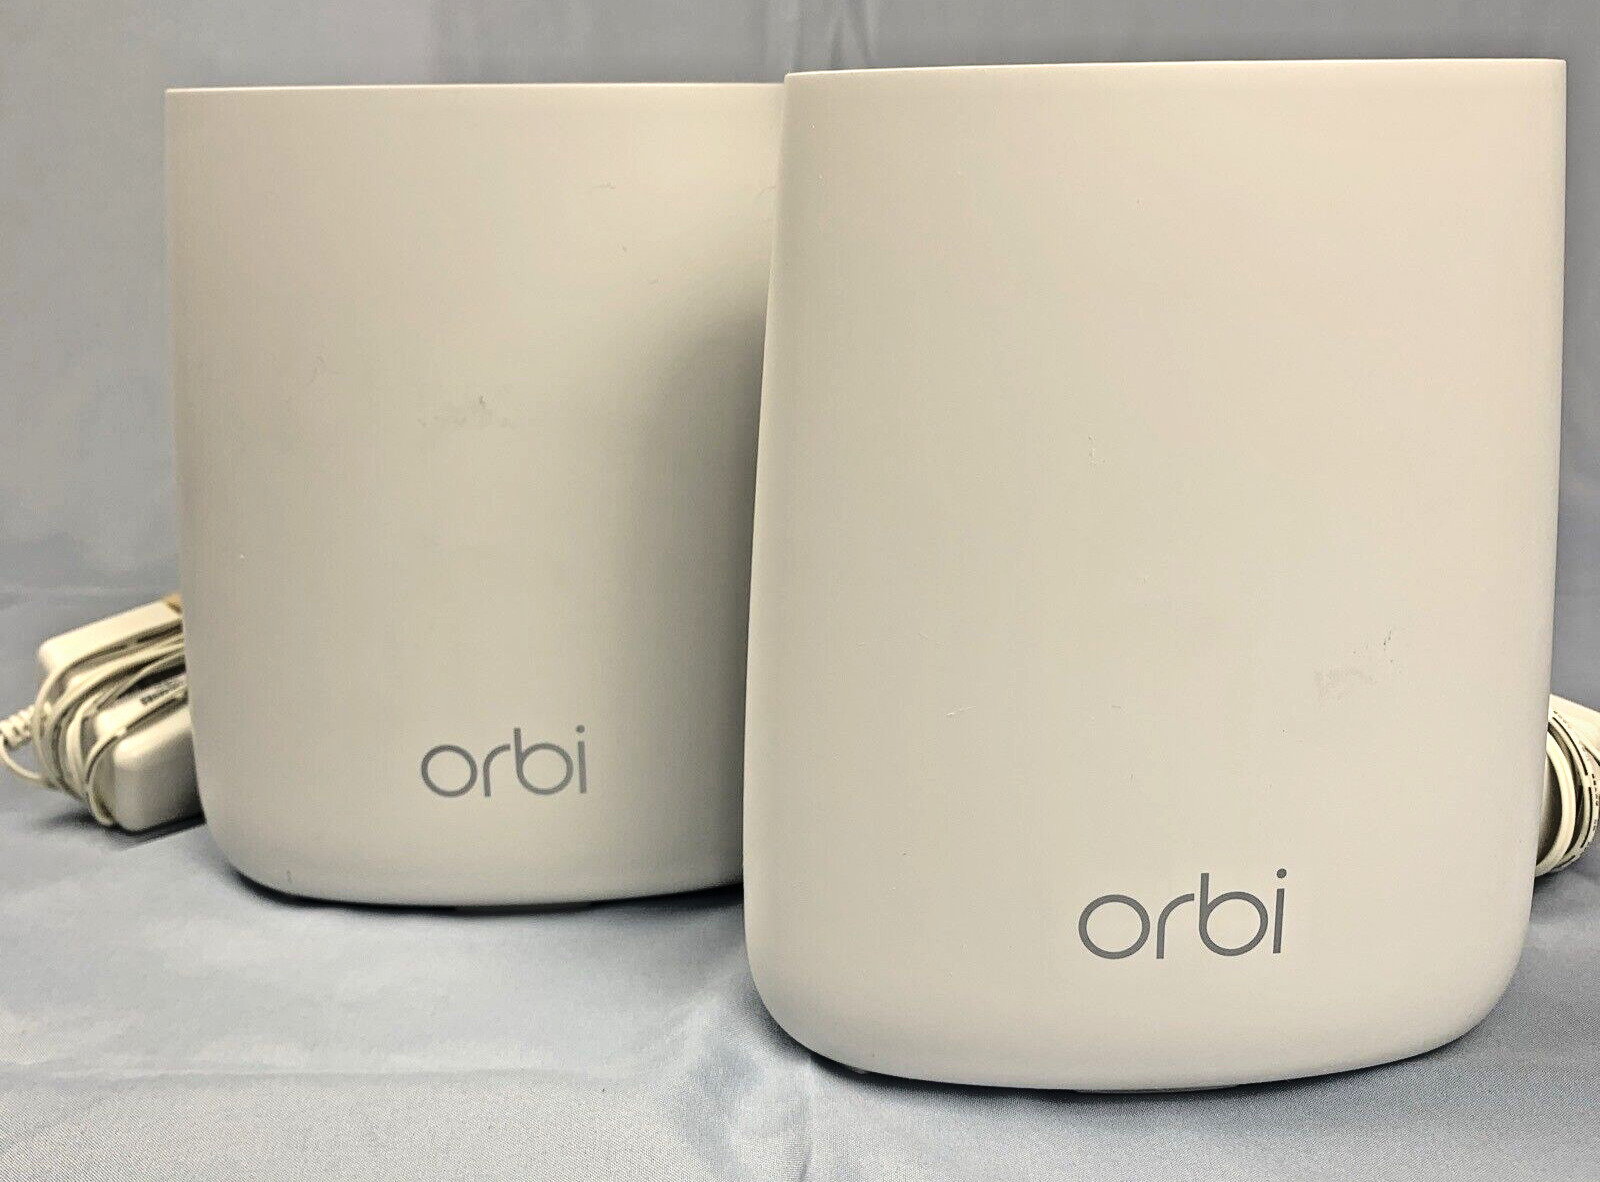 NETGEAR Orbi RBR20 Router with RBS20 Satellite Wifi (White) With Power Cords